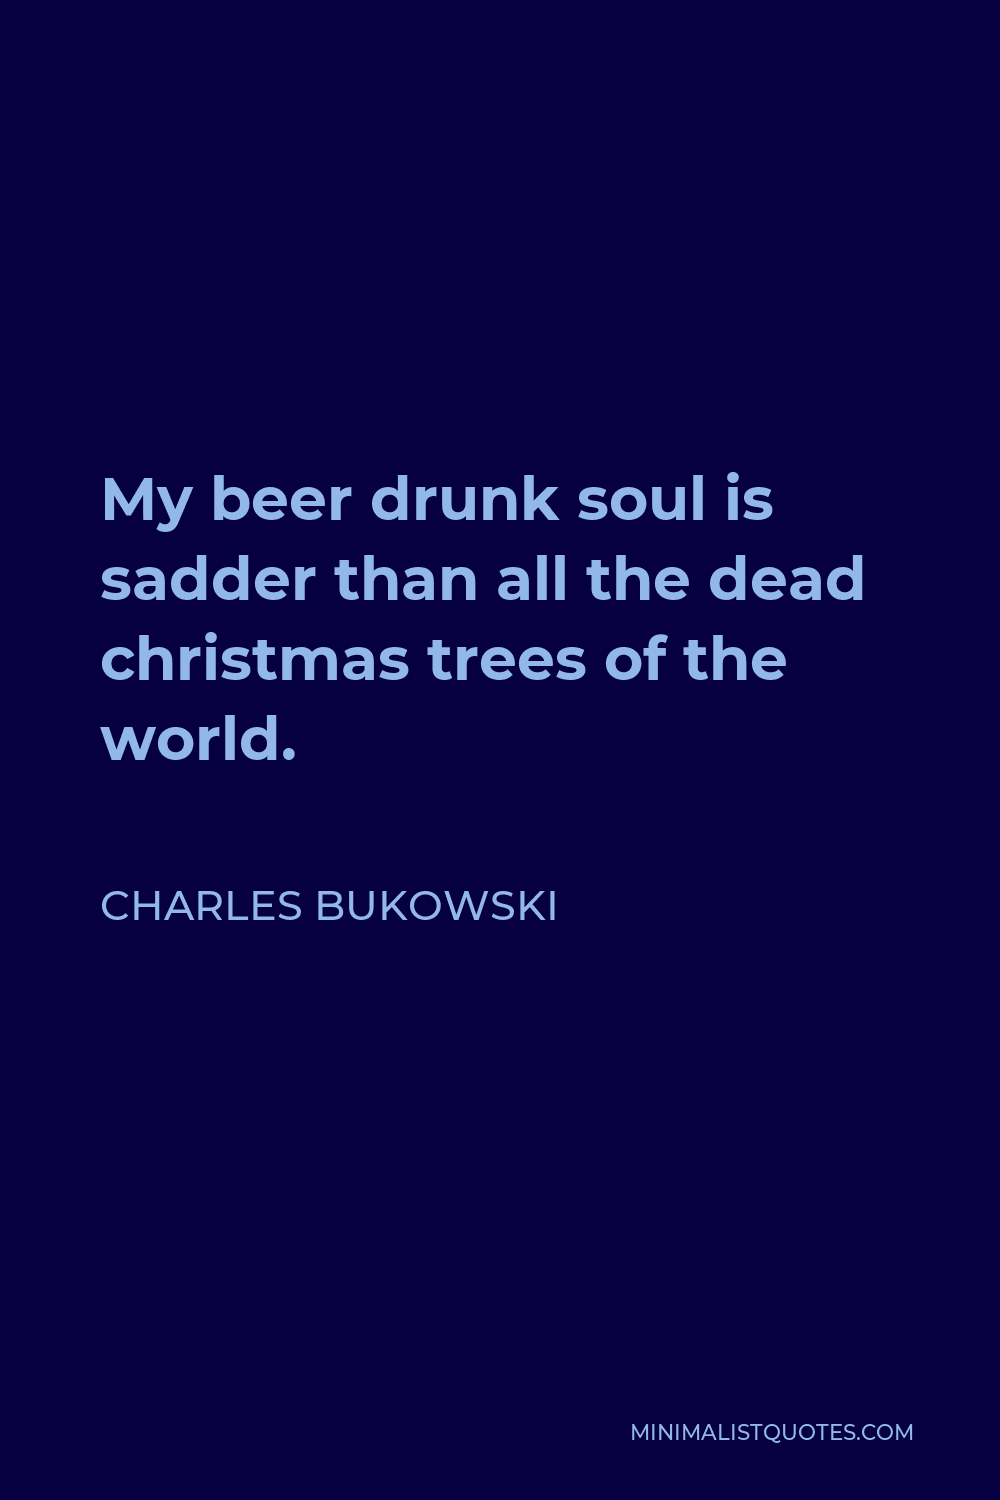 Charles Bukowski Quote - My beer drunk soul is sadder than all the dead christmas trees of the world.